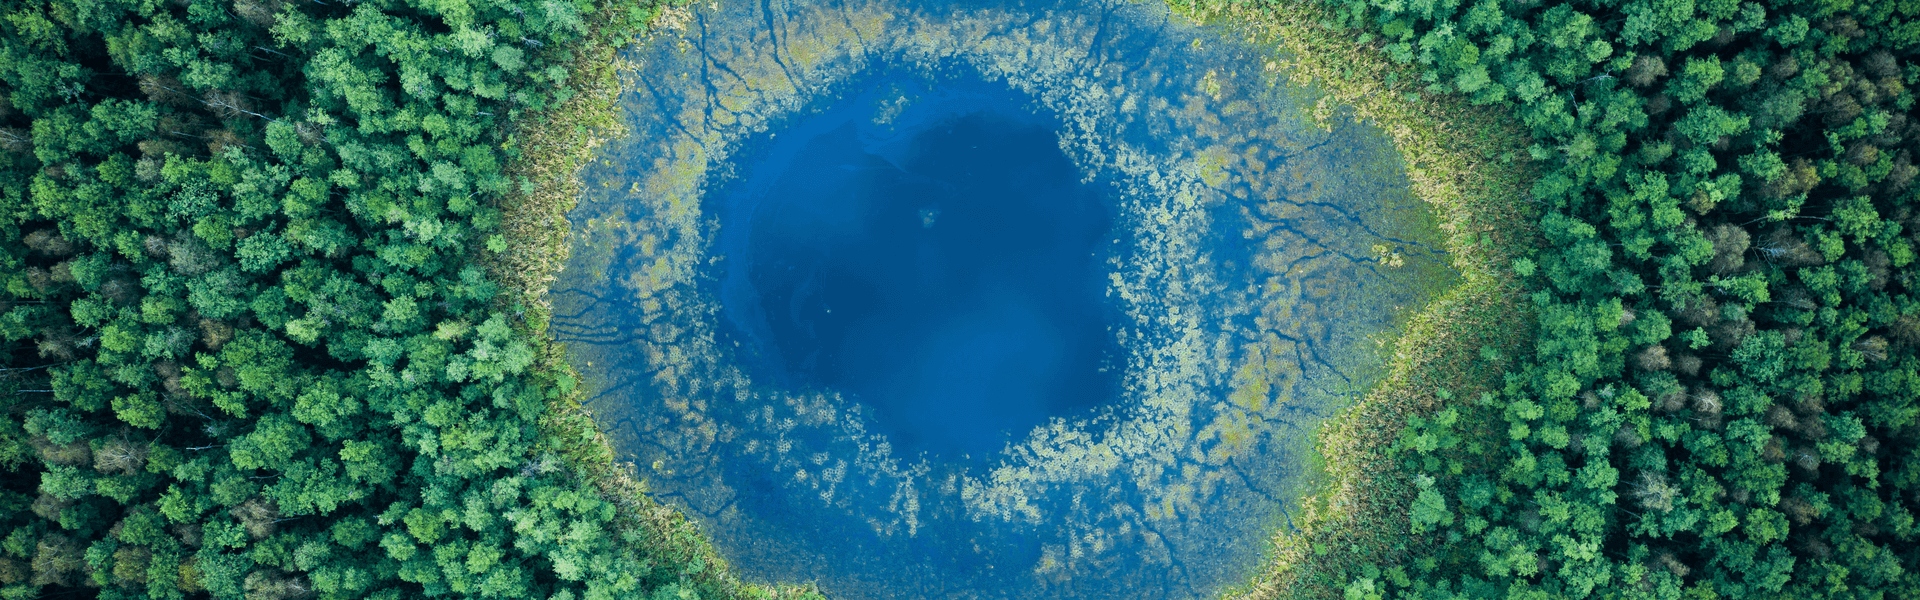 Lake in the middle of the forest - bird's eye view